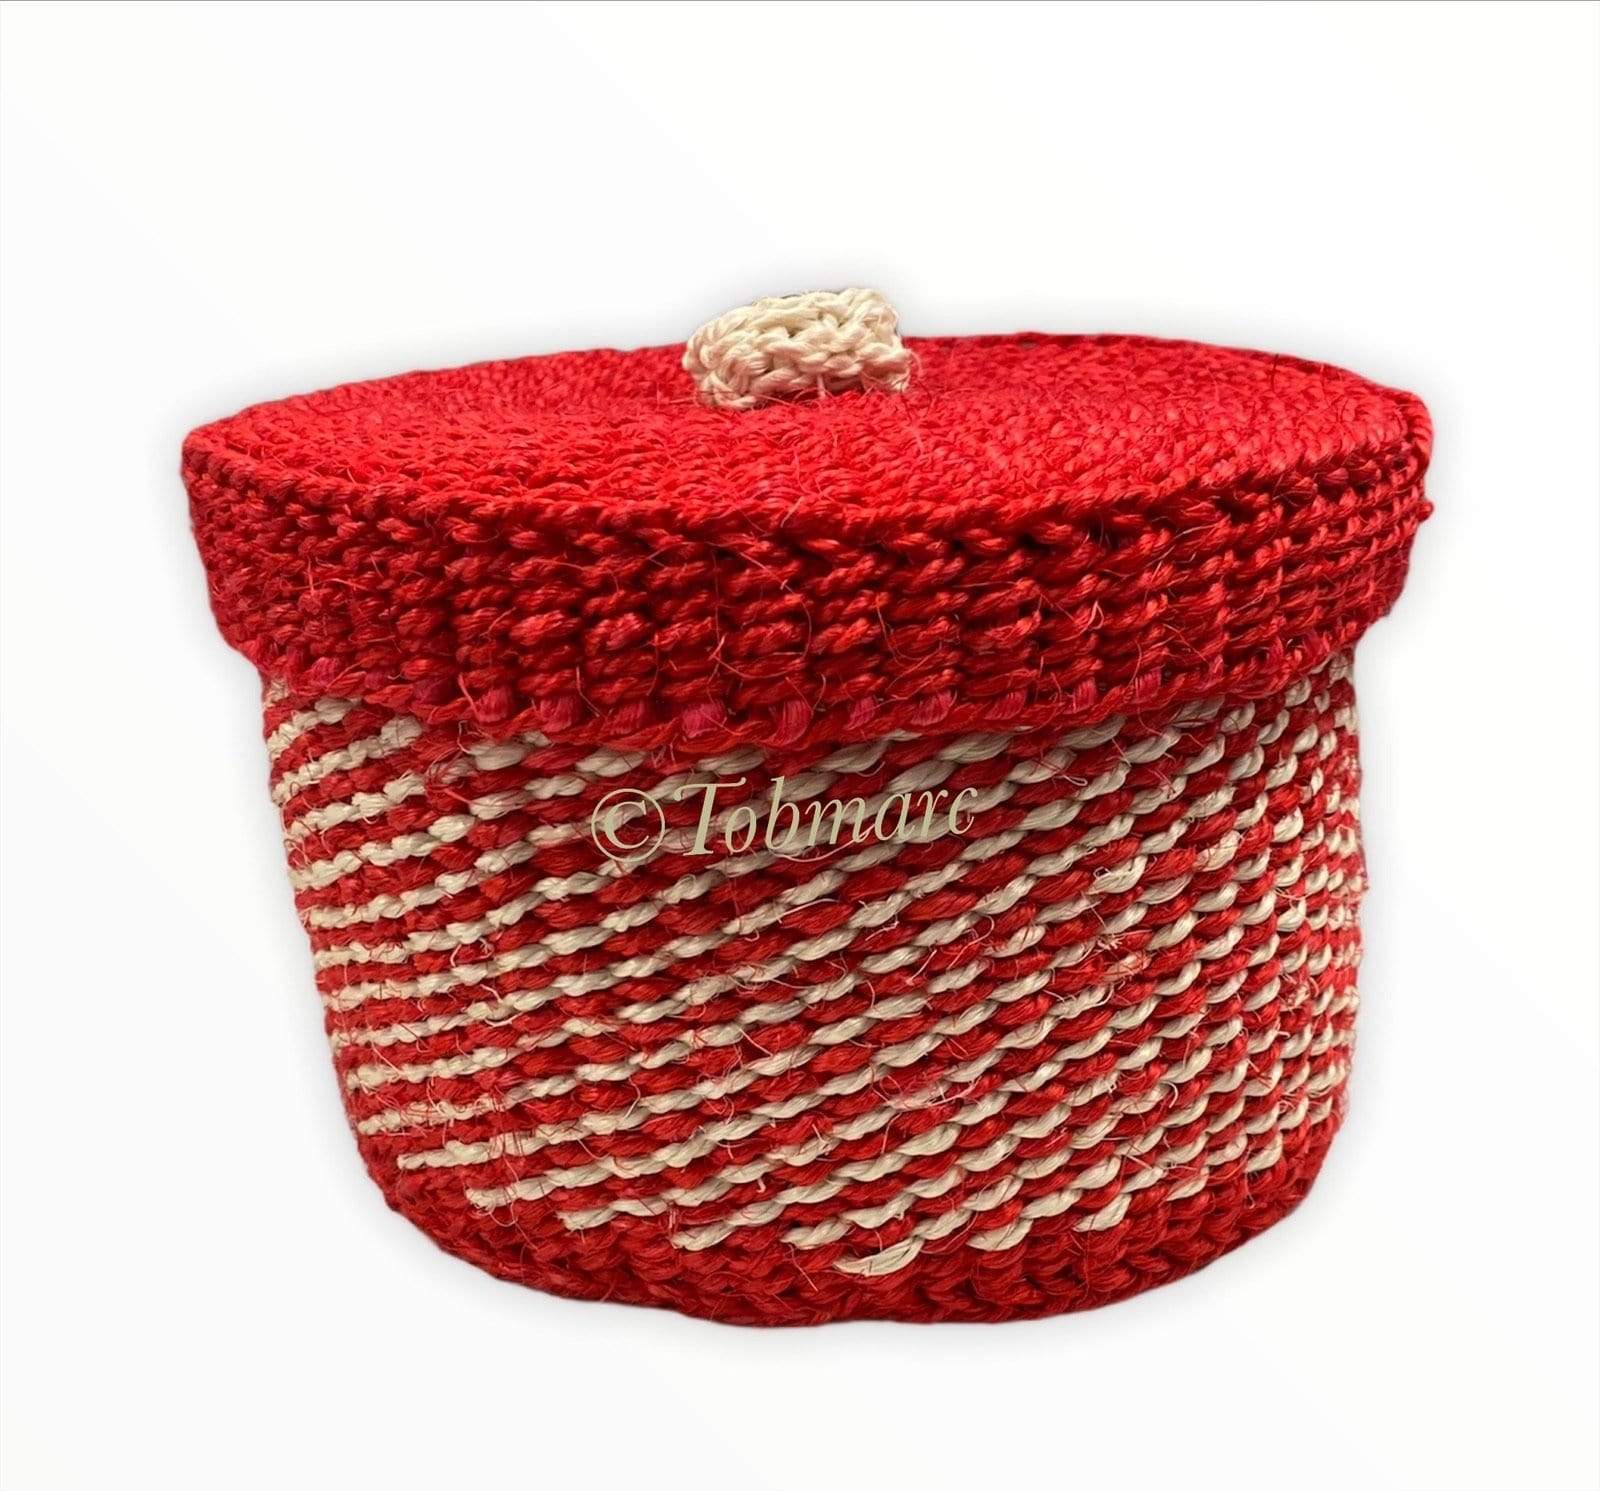 Tobmarc Home Decor & Gifts  Red and White TWIN-Small Baskets with a Lid, basket storage, Handwoven Mini Basket